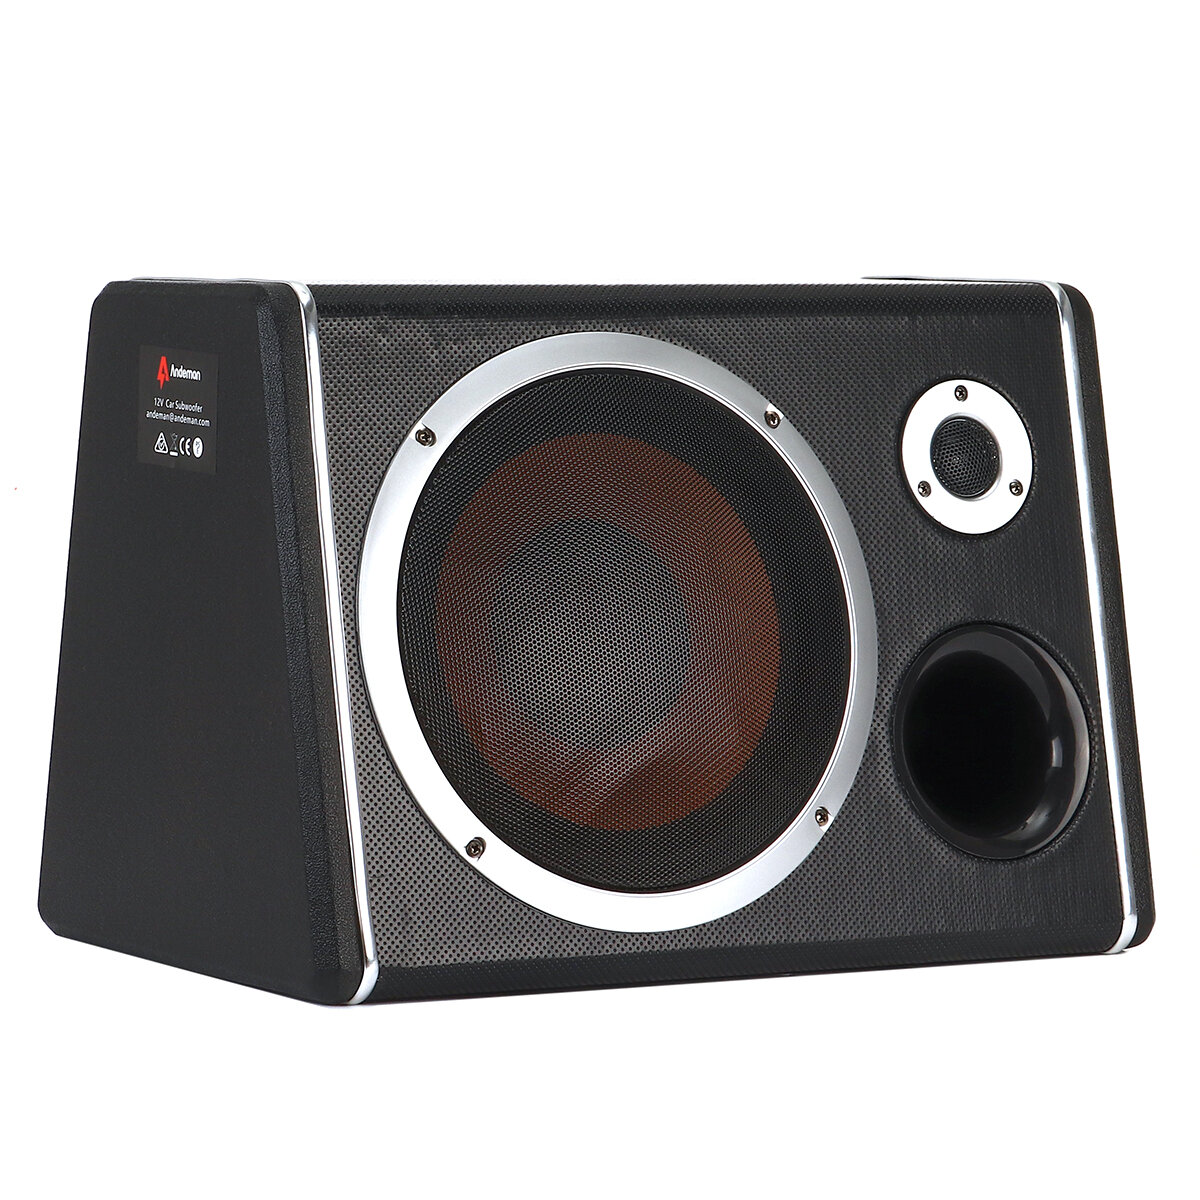 best price,andeman,k,1011apr,10inch,900w,car,subwoofer,12v,eu,coupon,price,discount